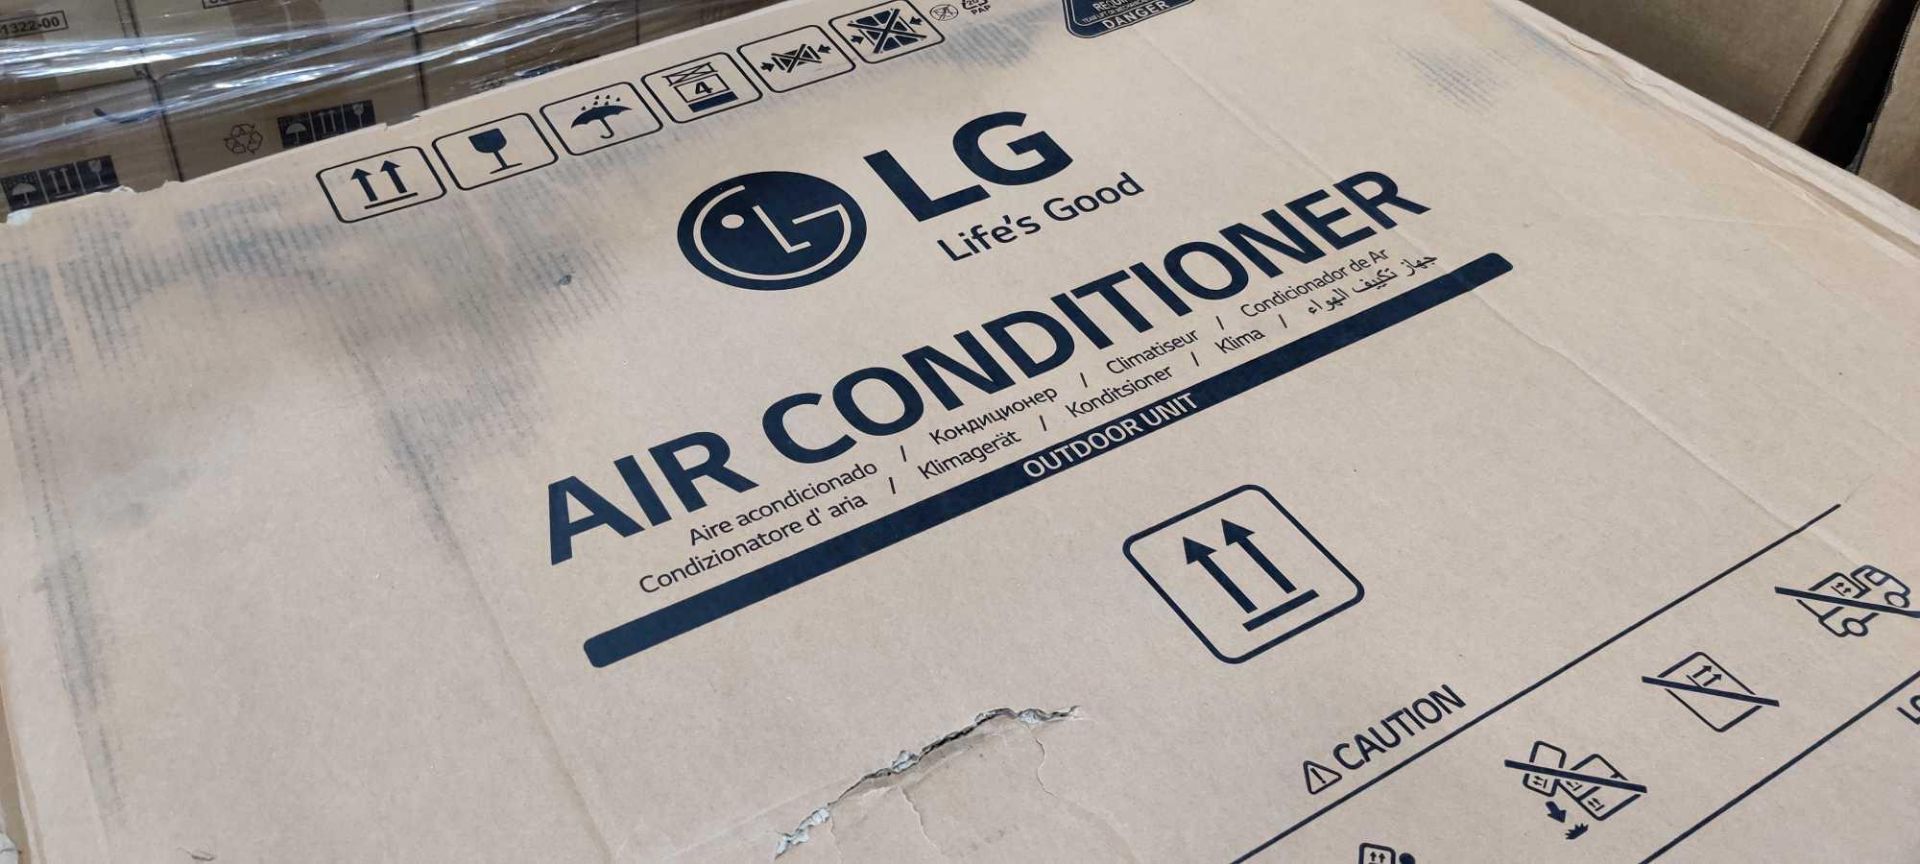 LG Air Conditioners - Image 2 of 2